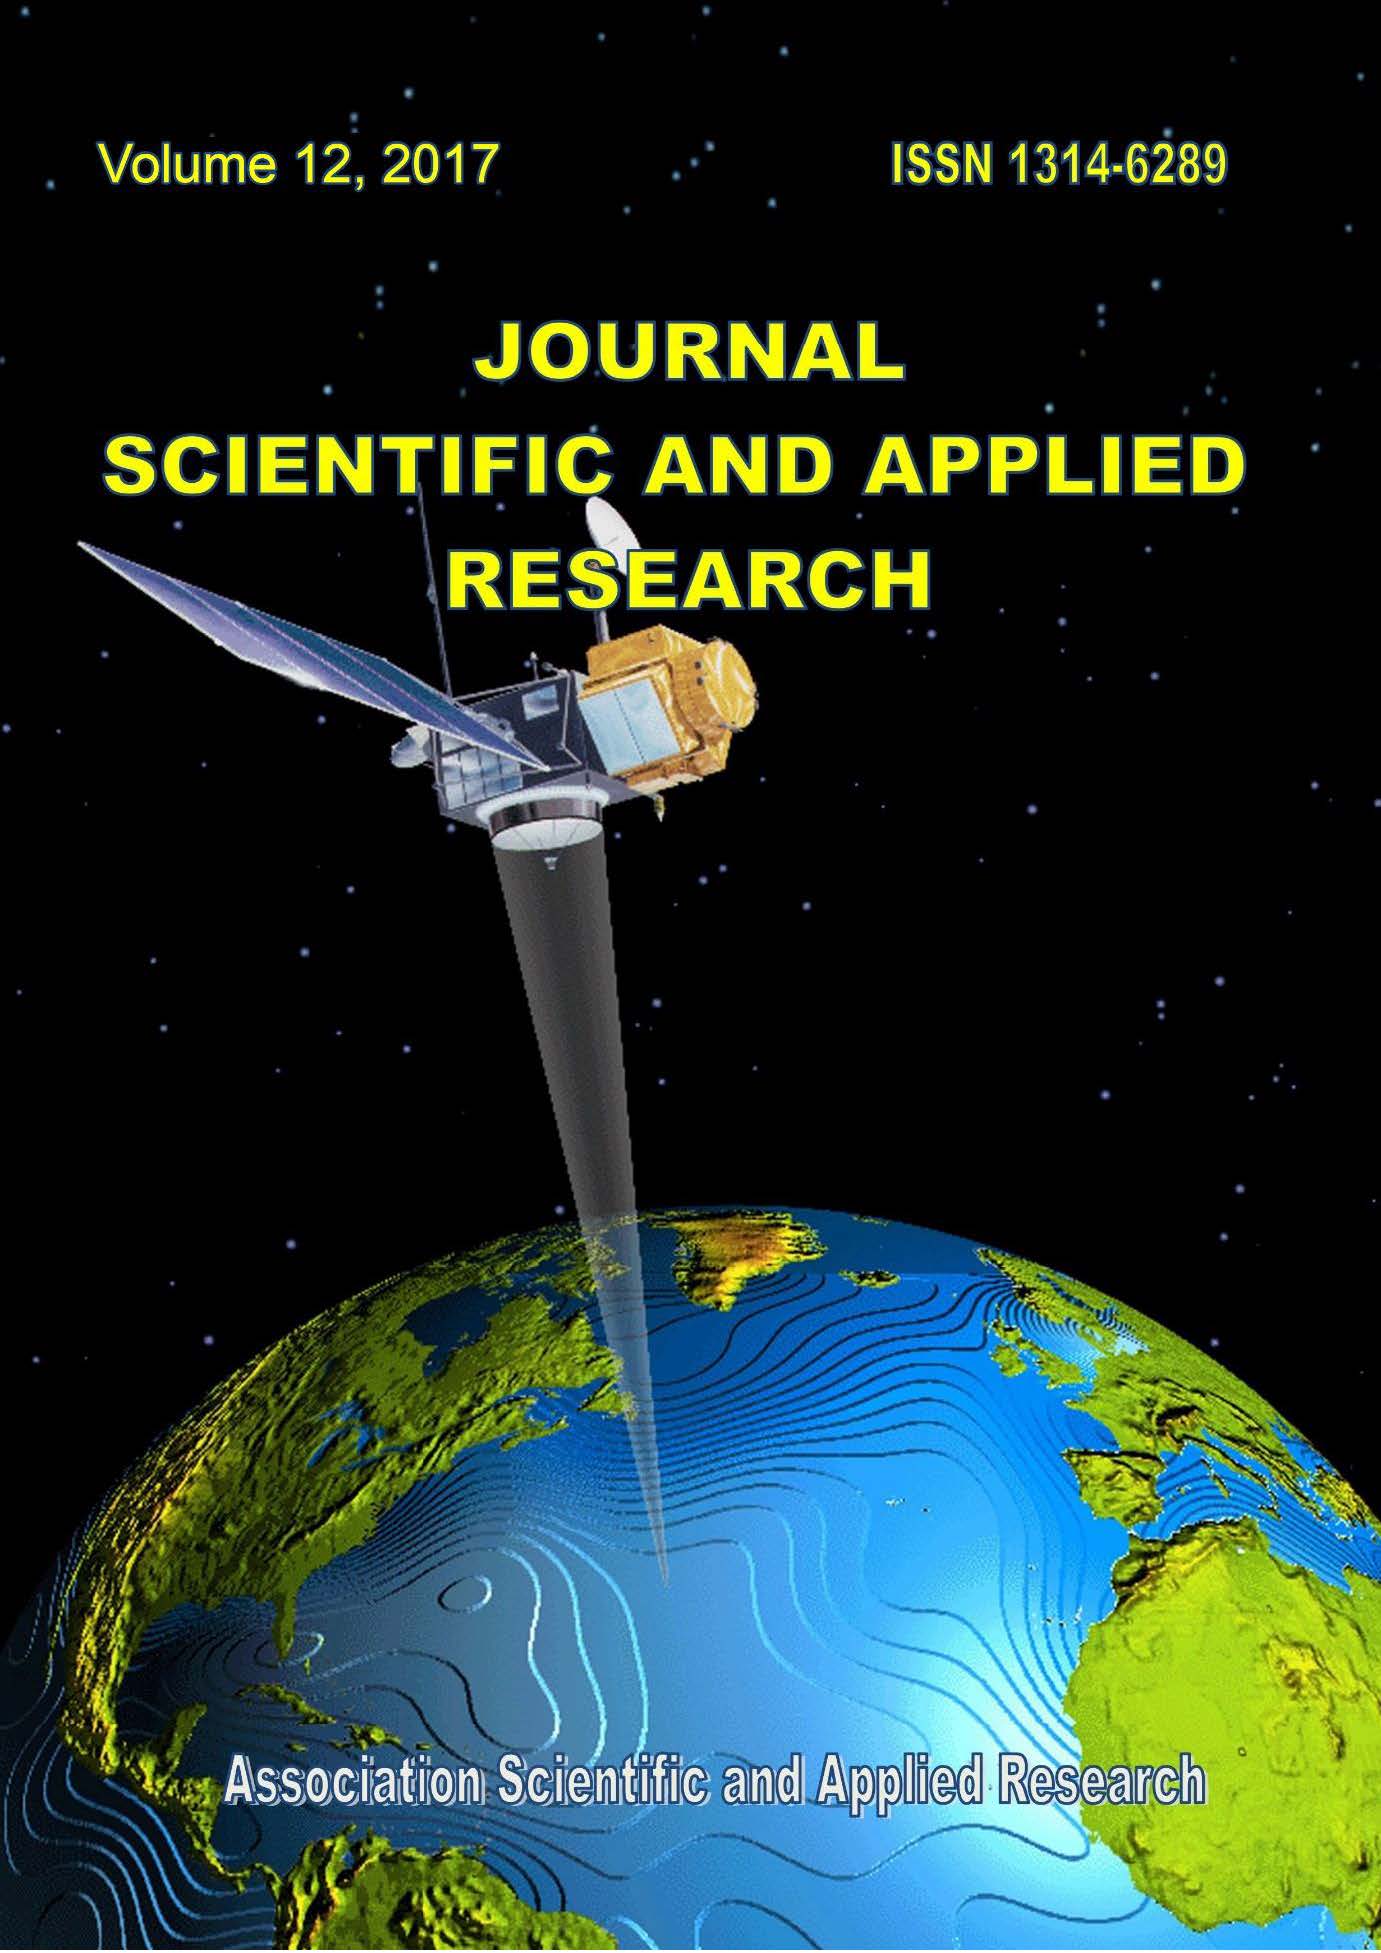 					View Vol. 12 No. 1 (2017): Journal Scientific and Applied Research
				